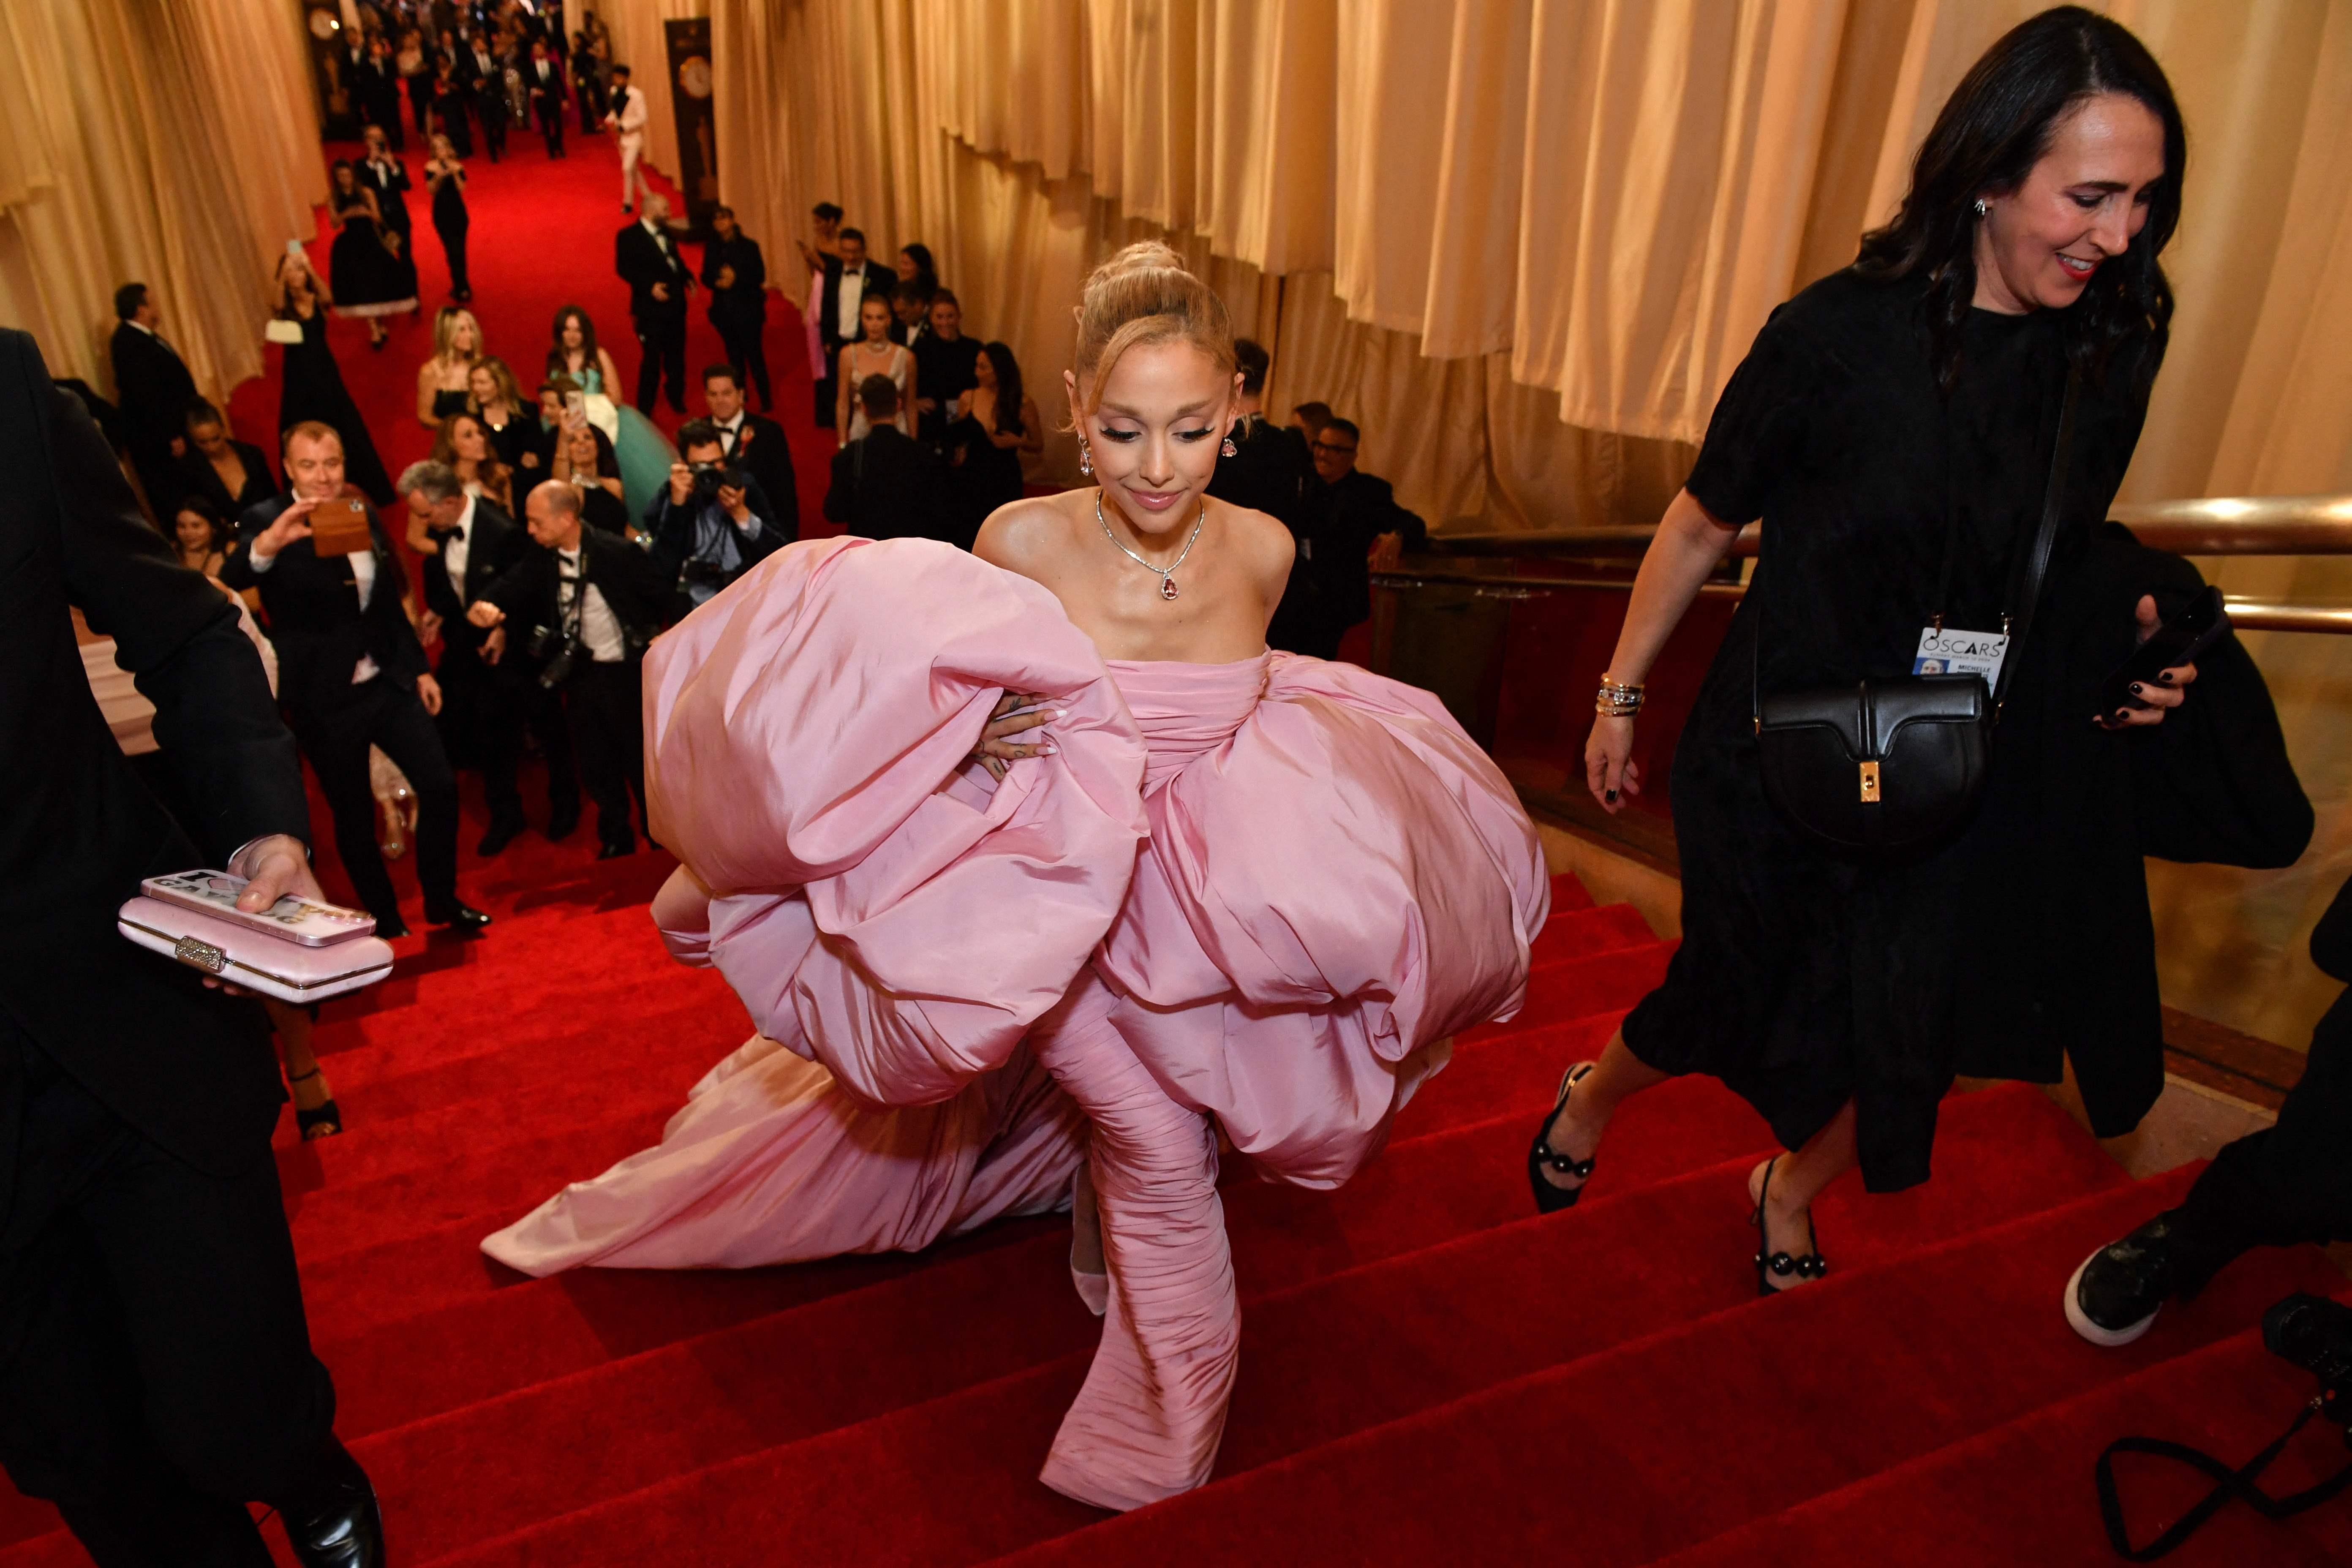 Ariana Grande had a quick turnaround from performing on Saturday Night Live to presenting at the Oscars the next evening. The singer and Wicked actress graced the red carpet in a striking pink bubble dress designed by Giambattista Valli, paying homage to her character Glinda. 